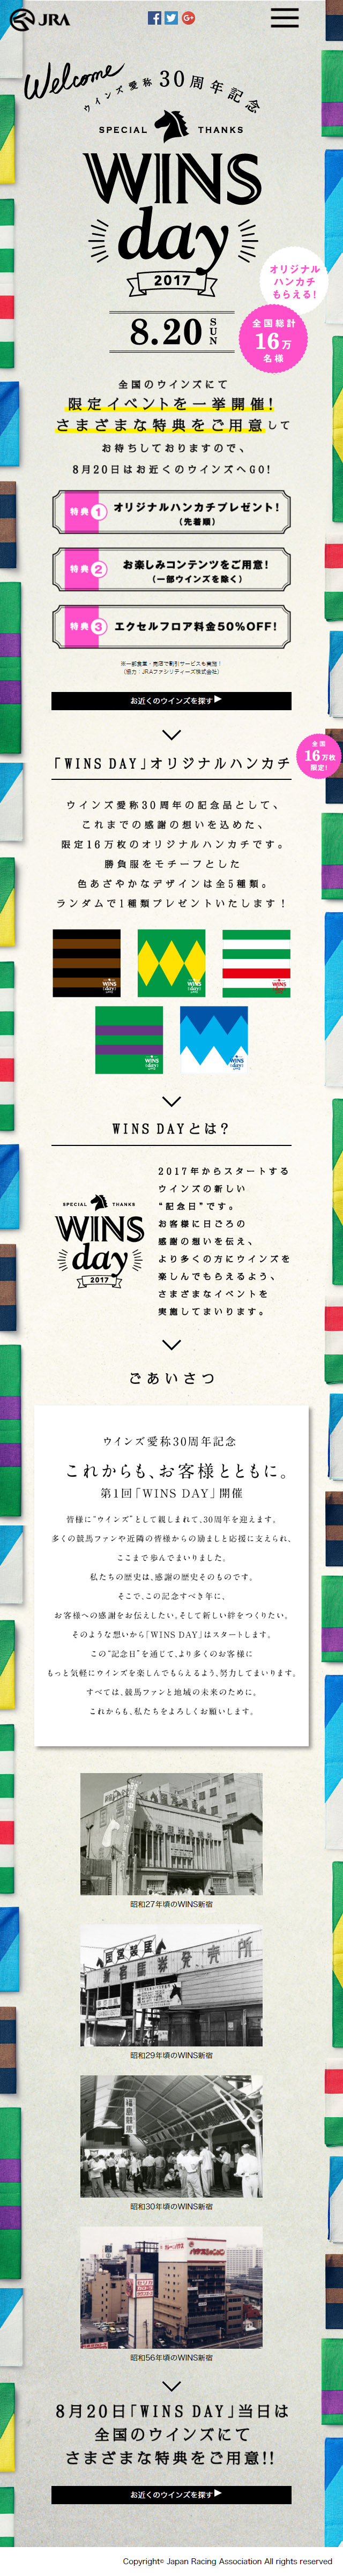 WINS day_sp_1